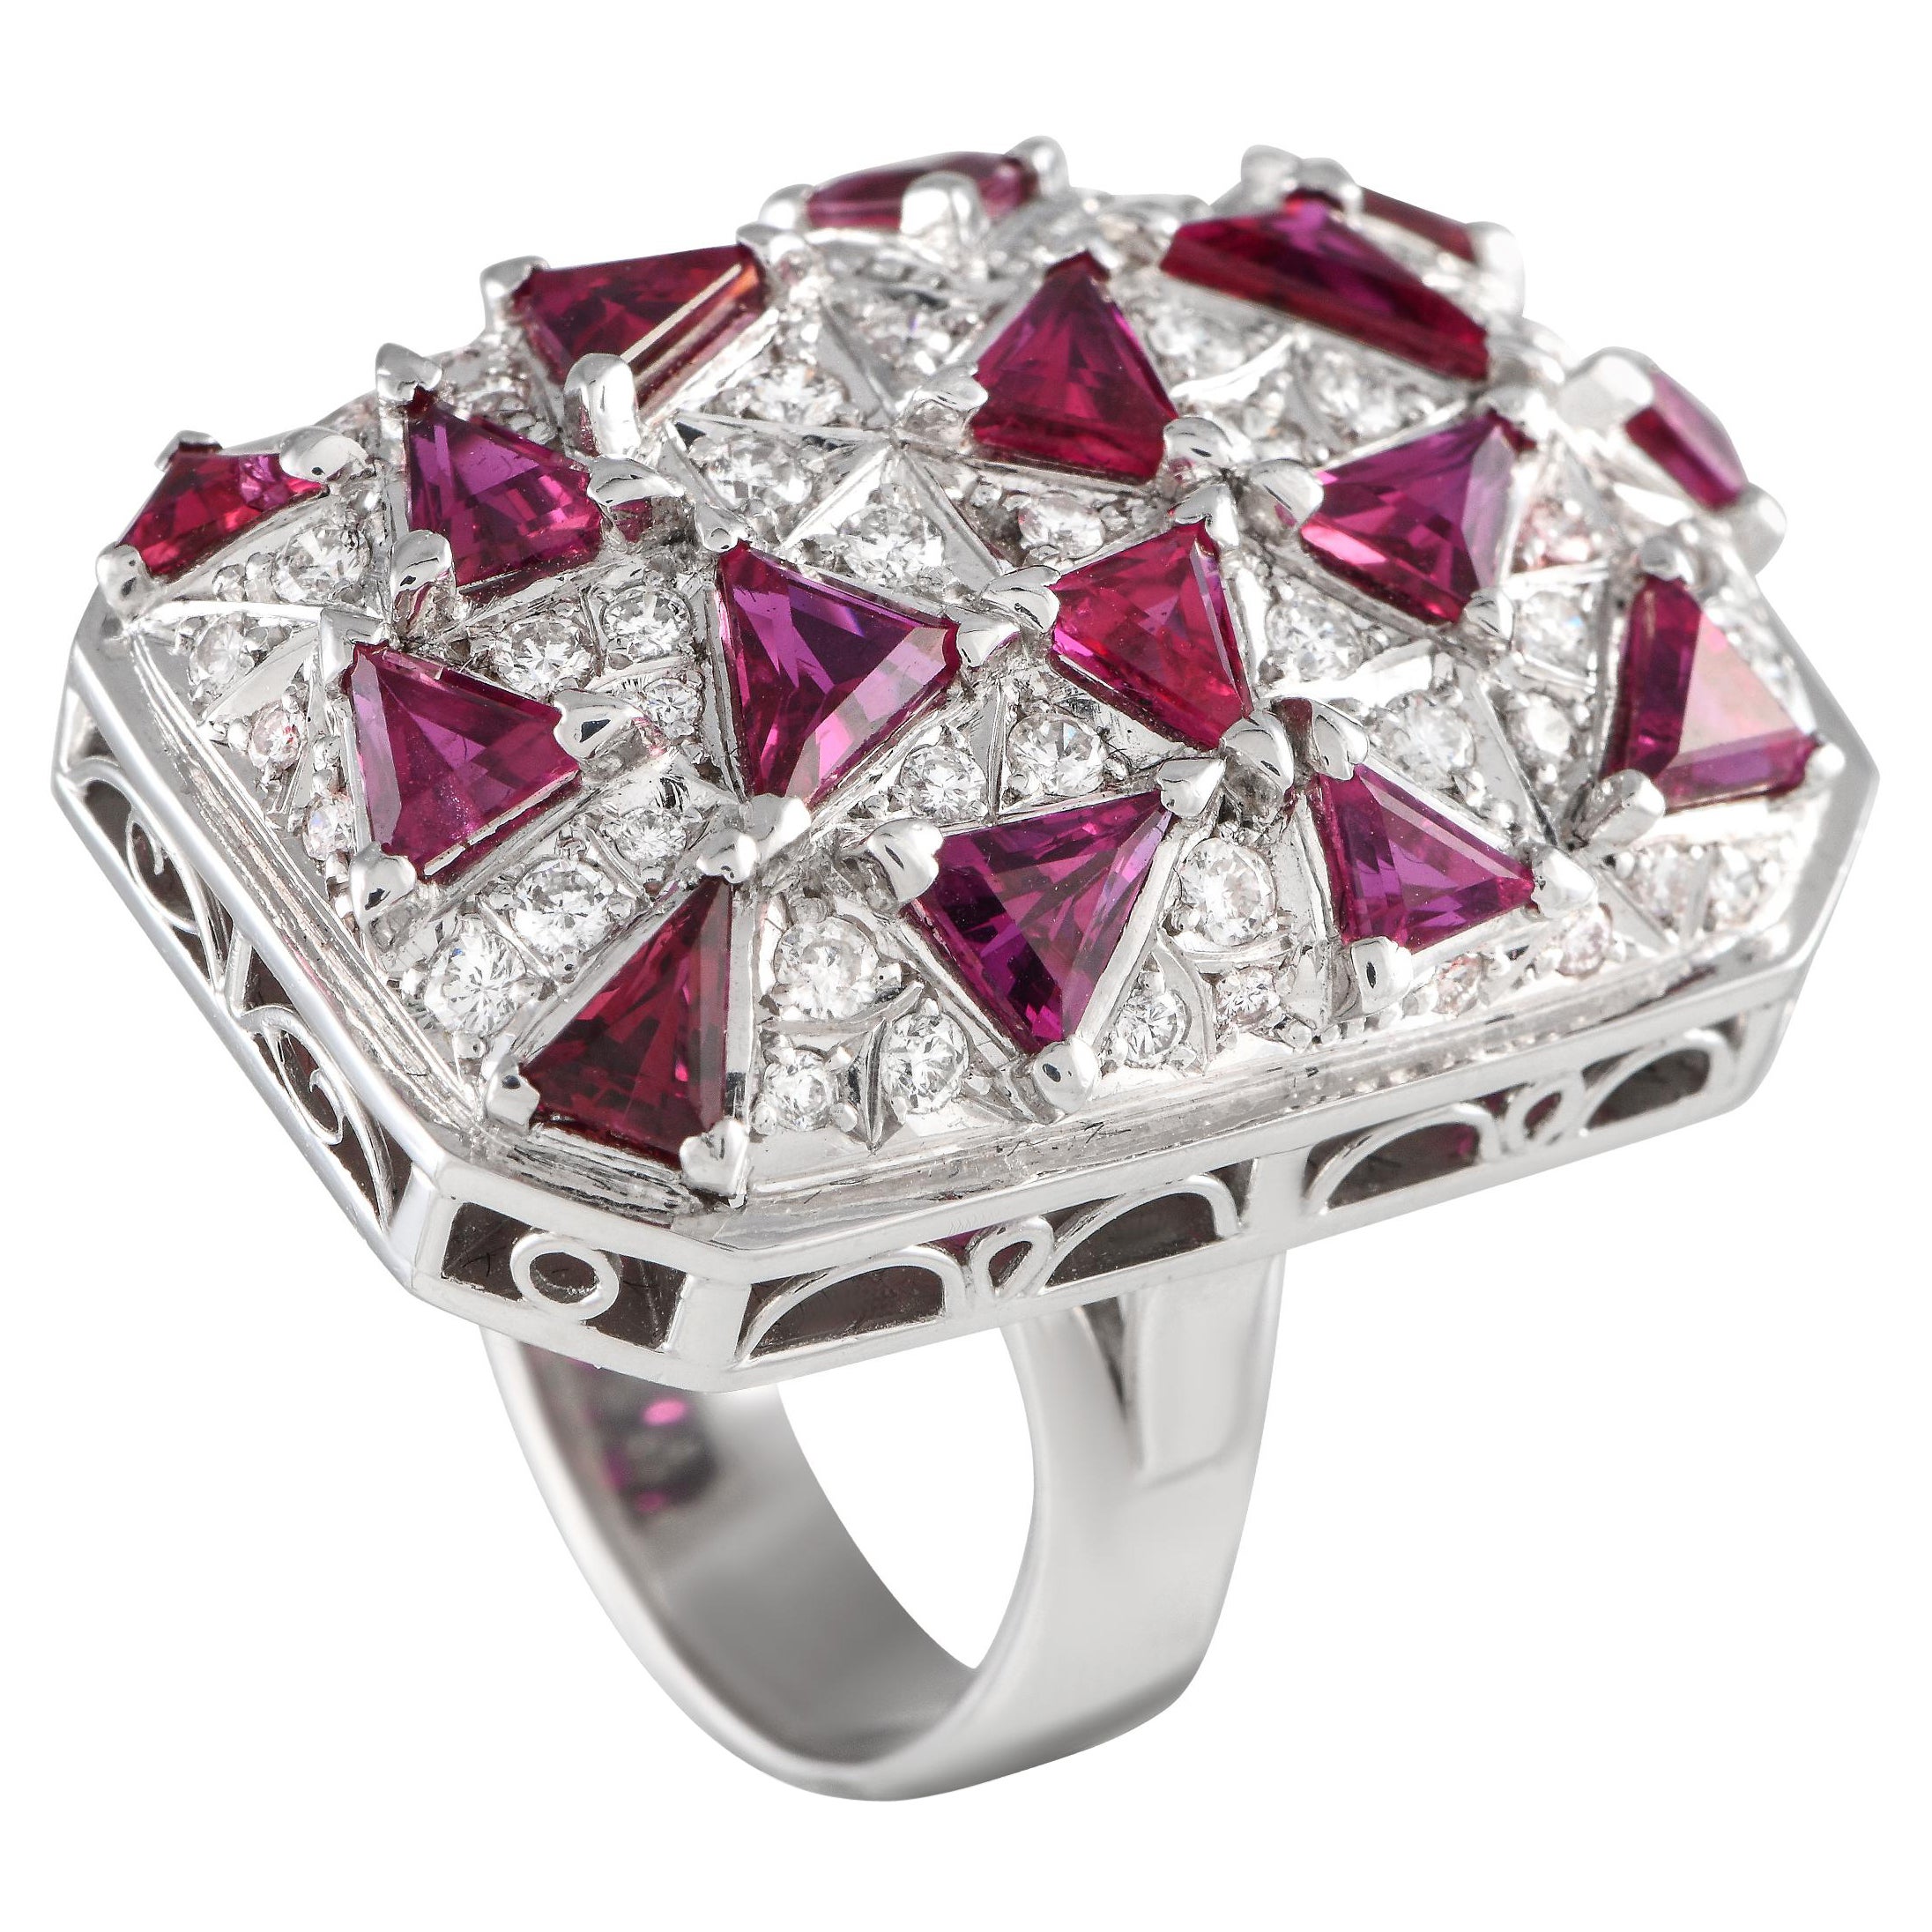 18K White Gold 0.78ct Diamond and Ruby Cocktail Ring MF08-012424 For Sale